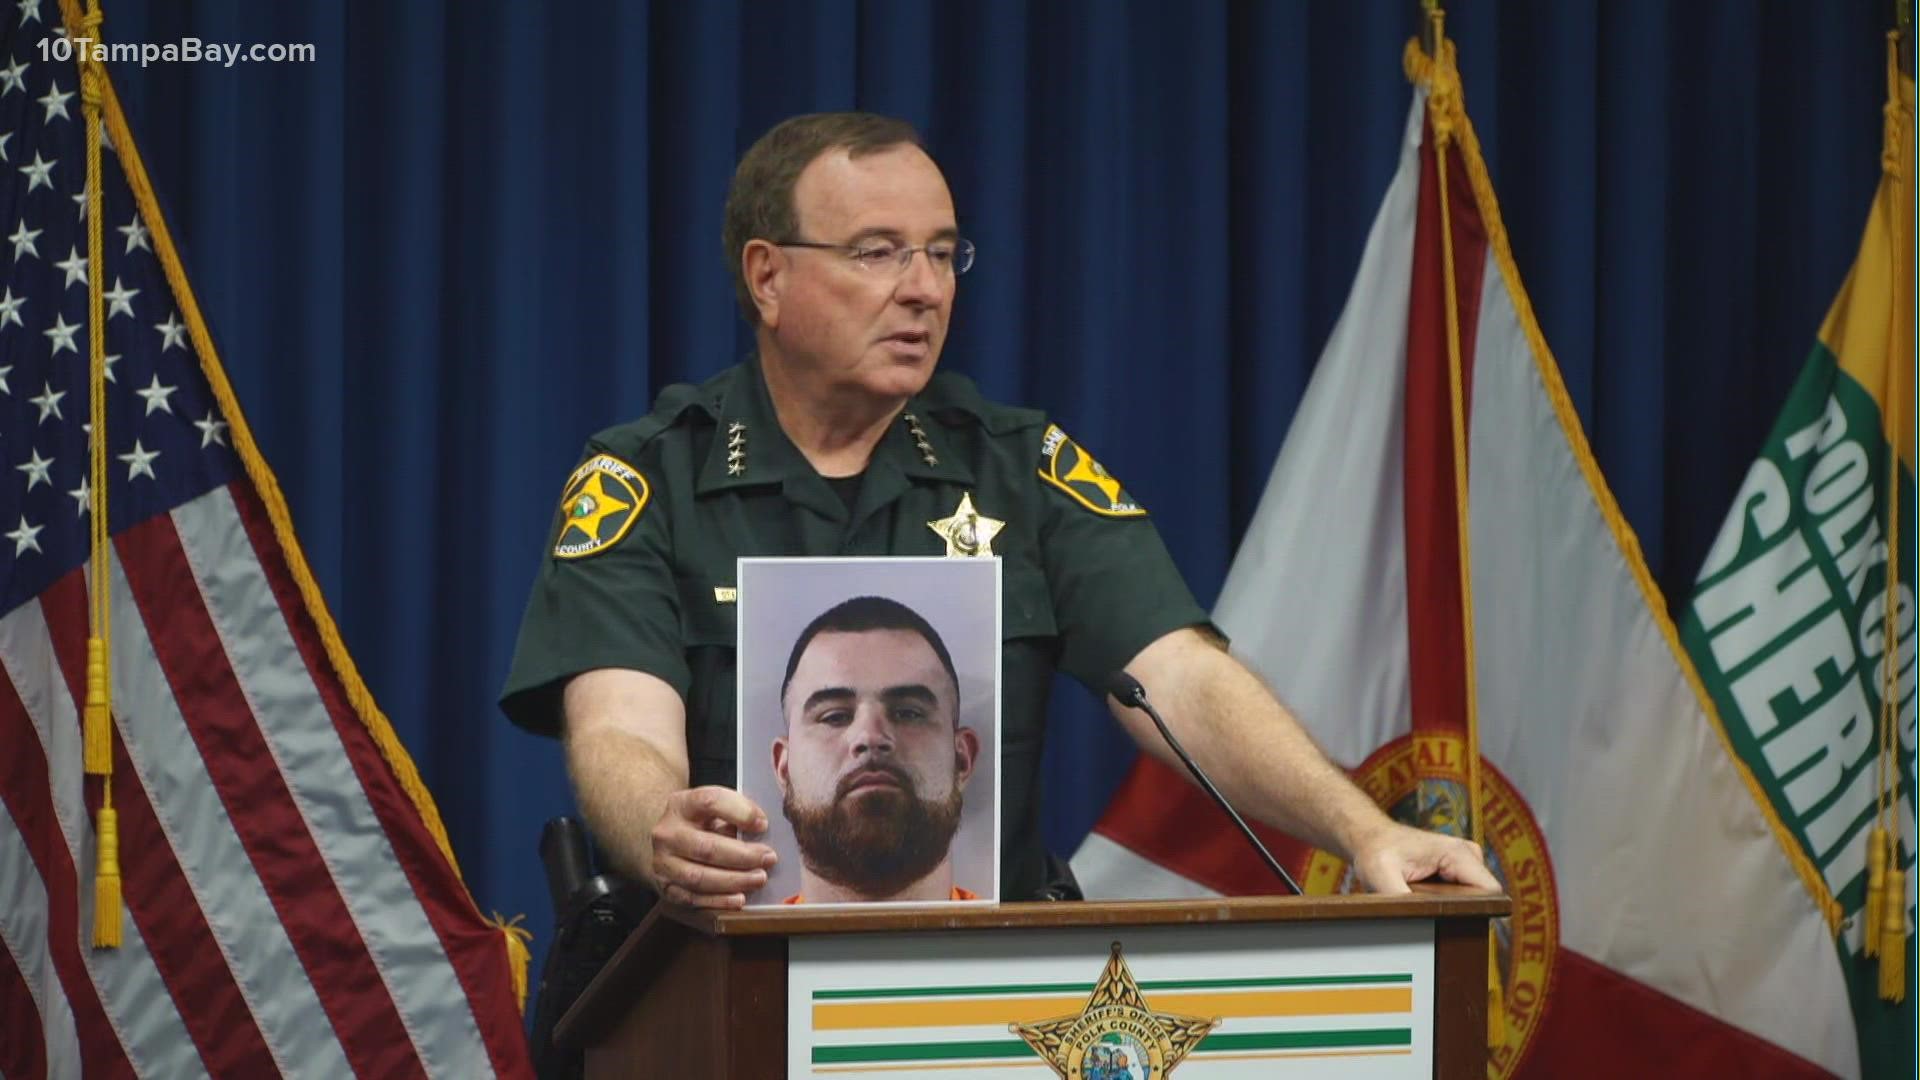 Sheriff Grady Judd speaks about the altercation that resulted in the death of Juan Barroso-Muriel.